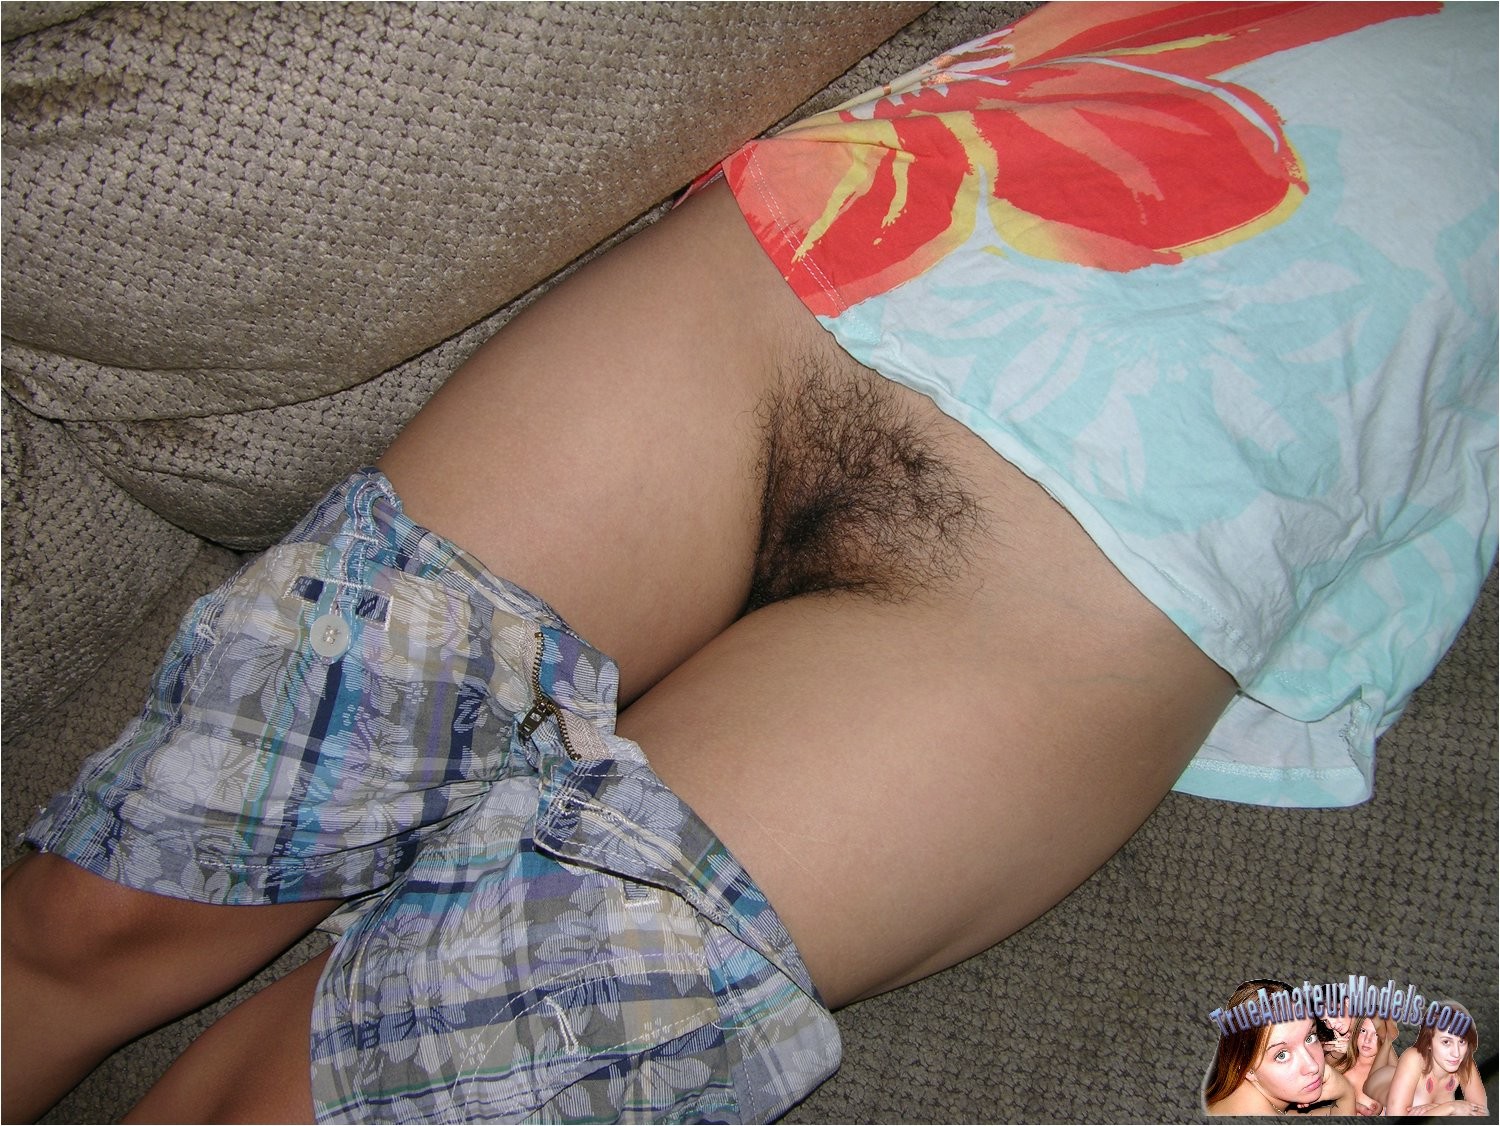 Amateur Hairy Pussy Indian Girl Spreading Nude #67297728